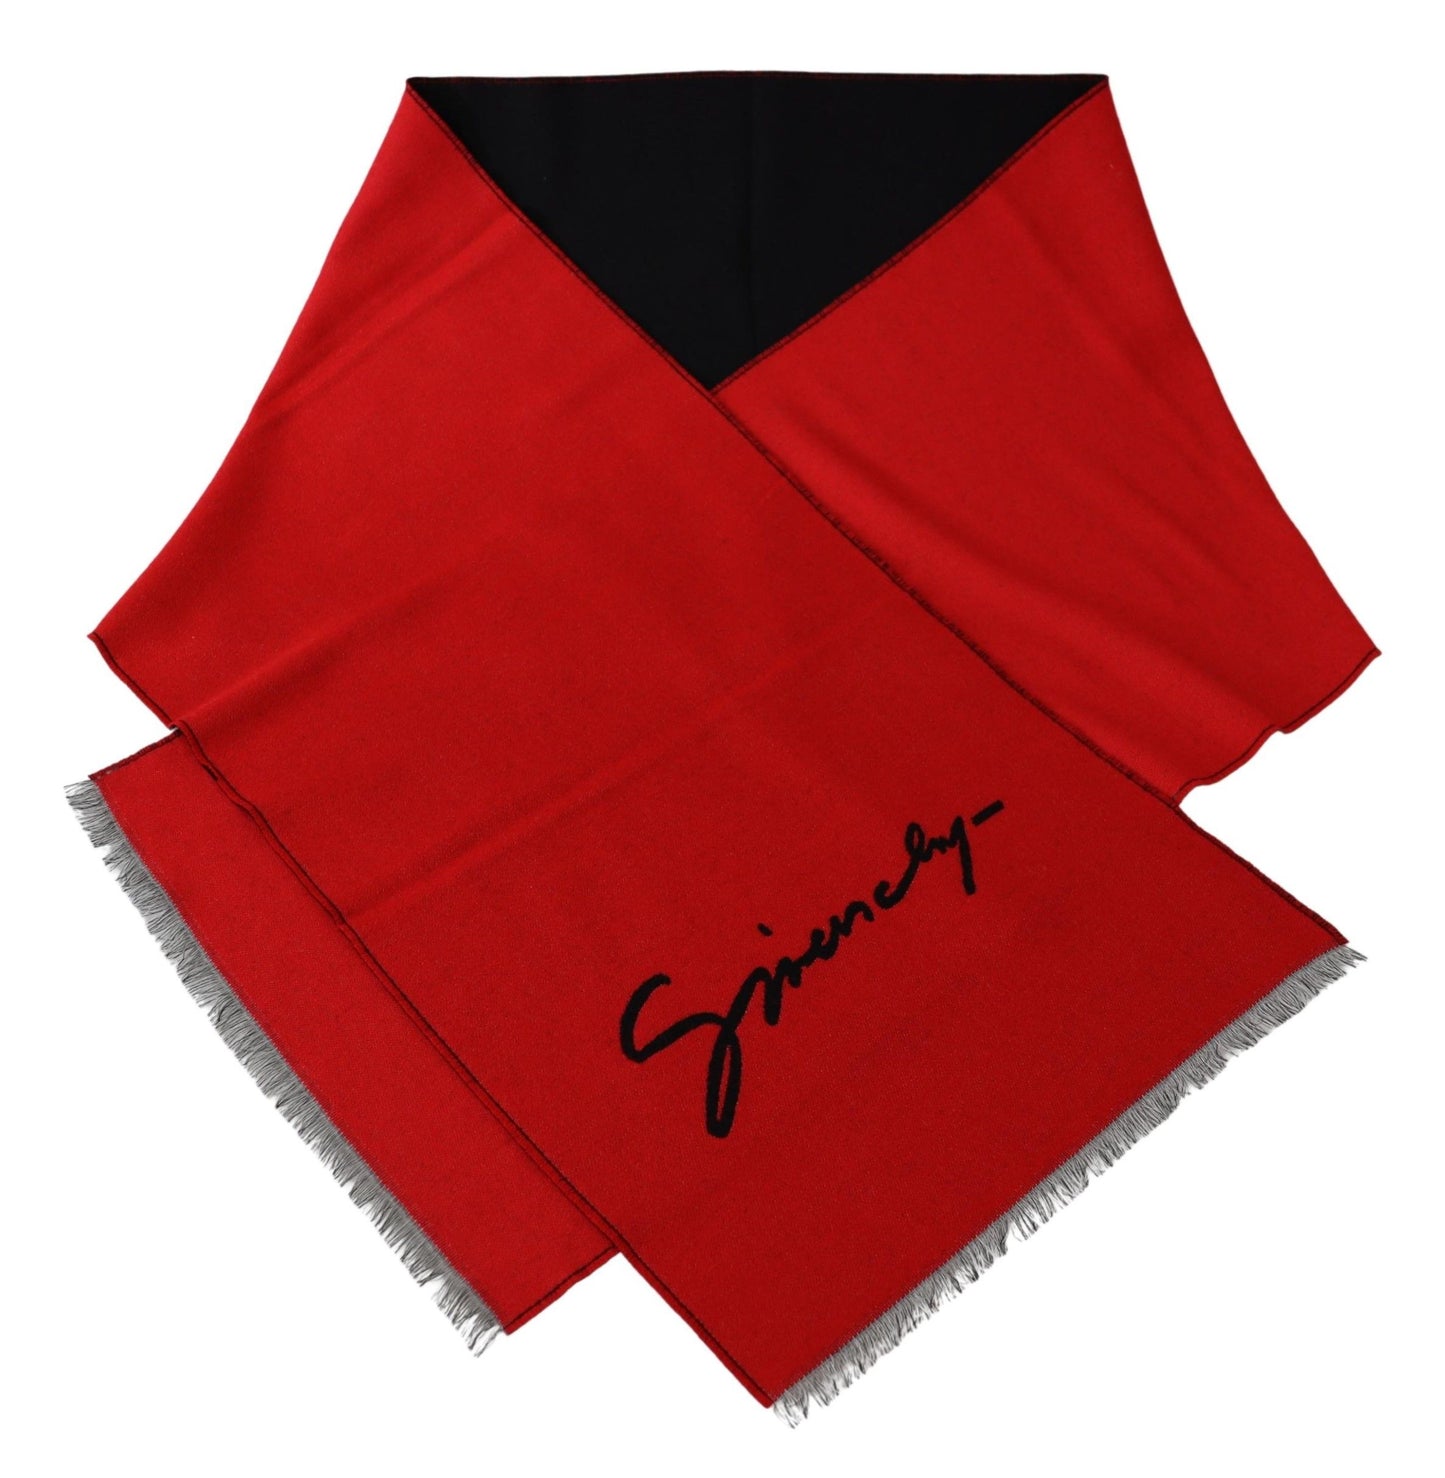 Givenchy Red Black Wool Unisex Winter Warm Scarf Wrap Shawl - Designed by Givenchy Available to Buy at a Discounted Price on Moon Behind The Hill Online Designer Discount Store